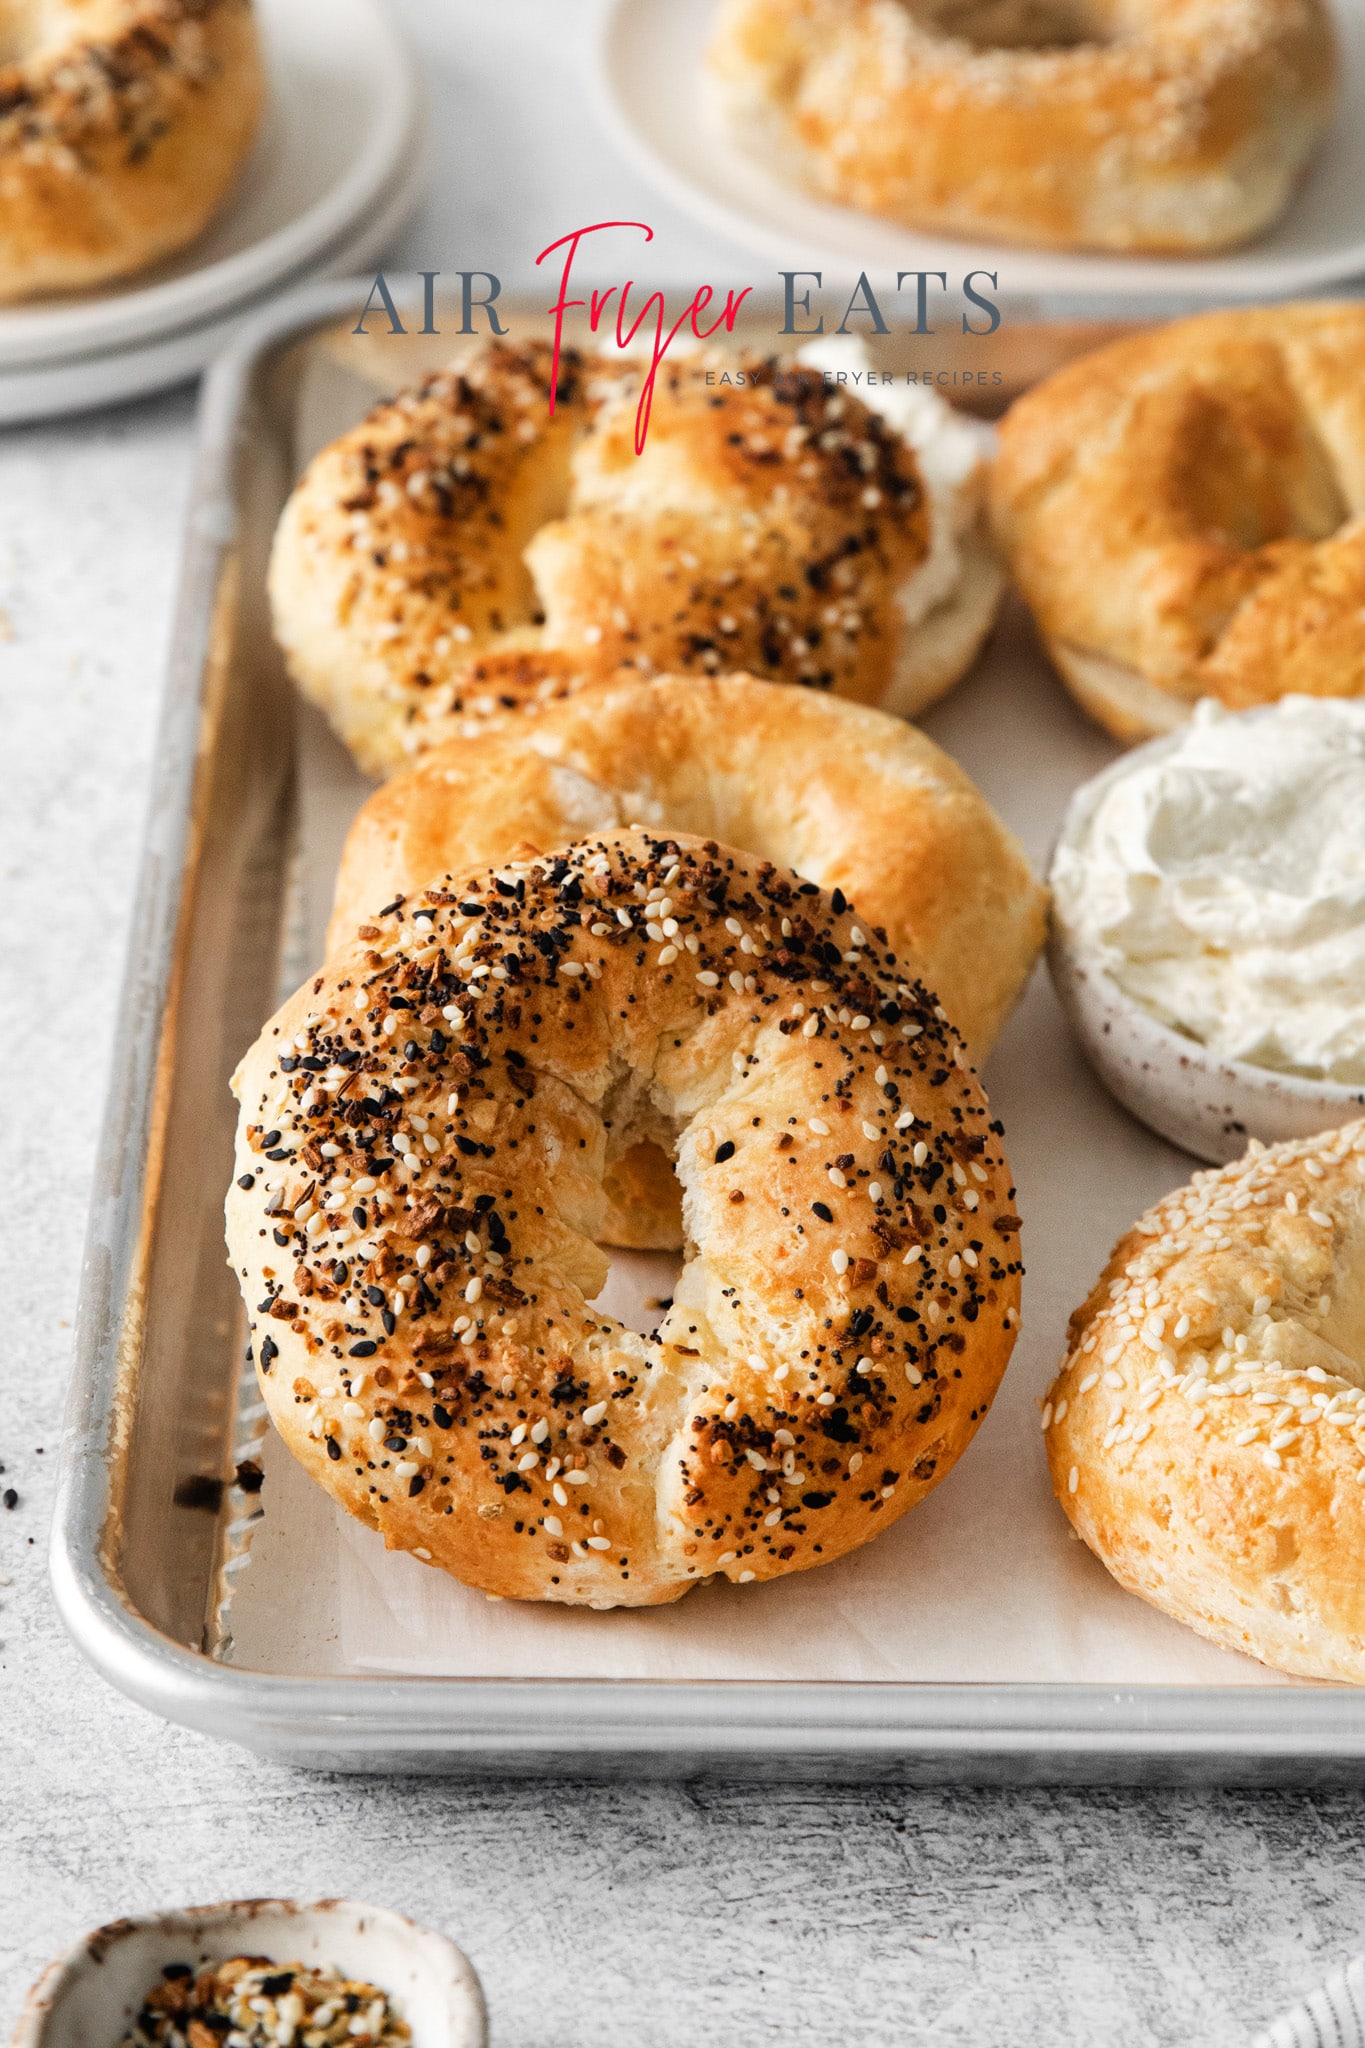 Photo of multiple air fryer bagels on a baking sheet with a small white bowl of cream cheese on the sheet.